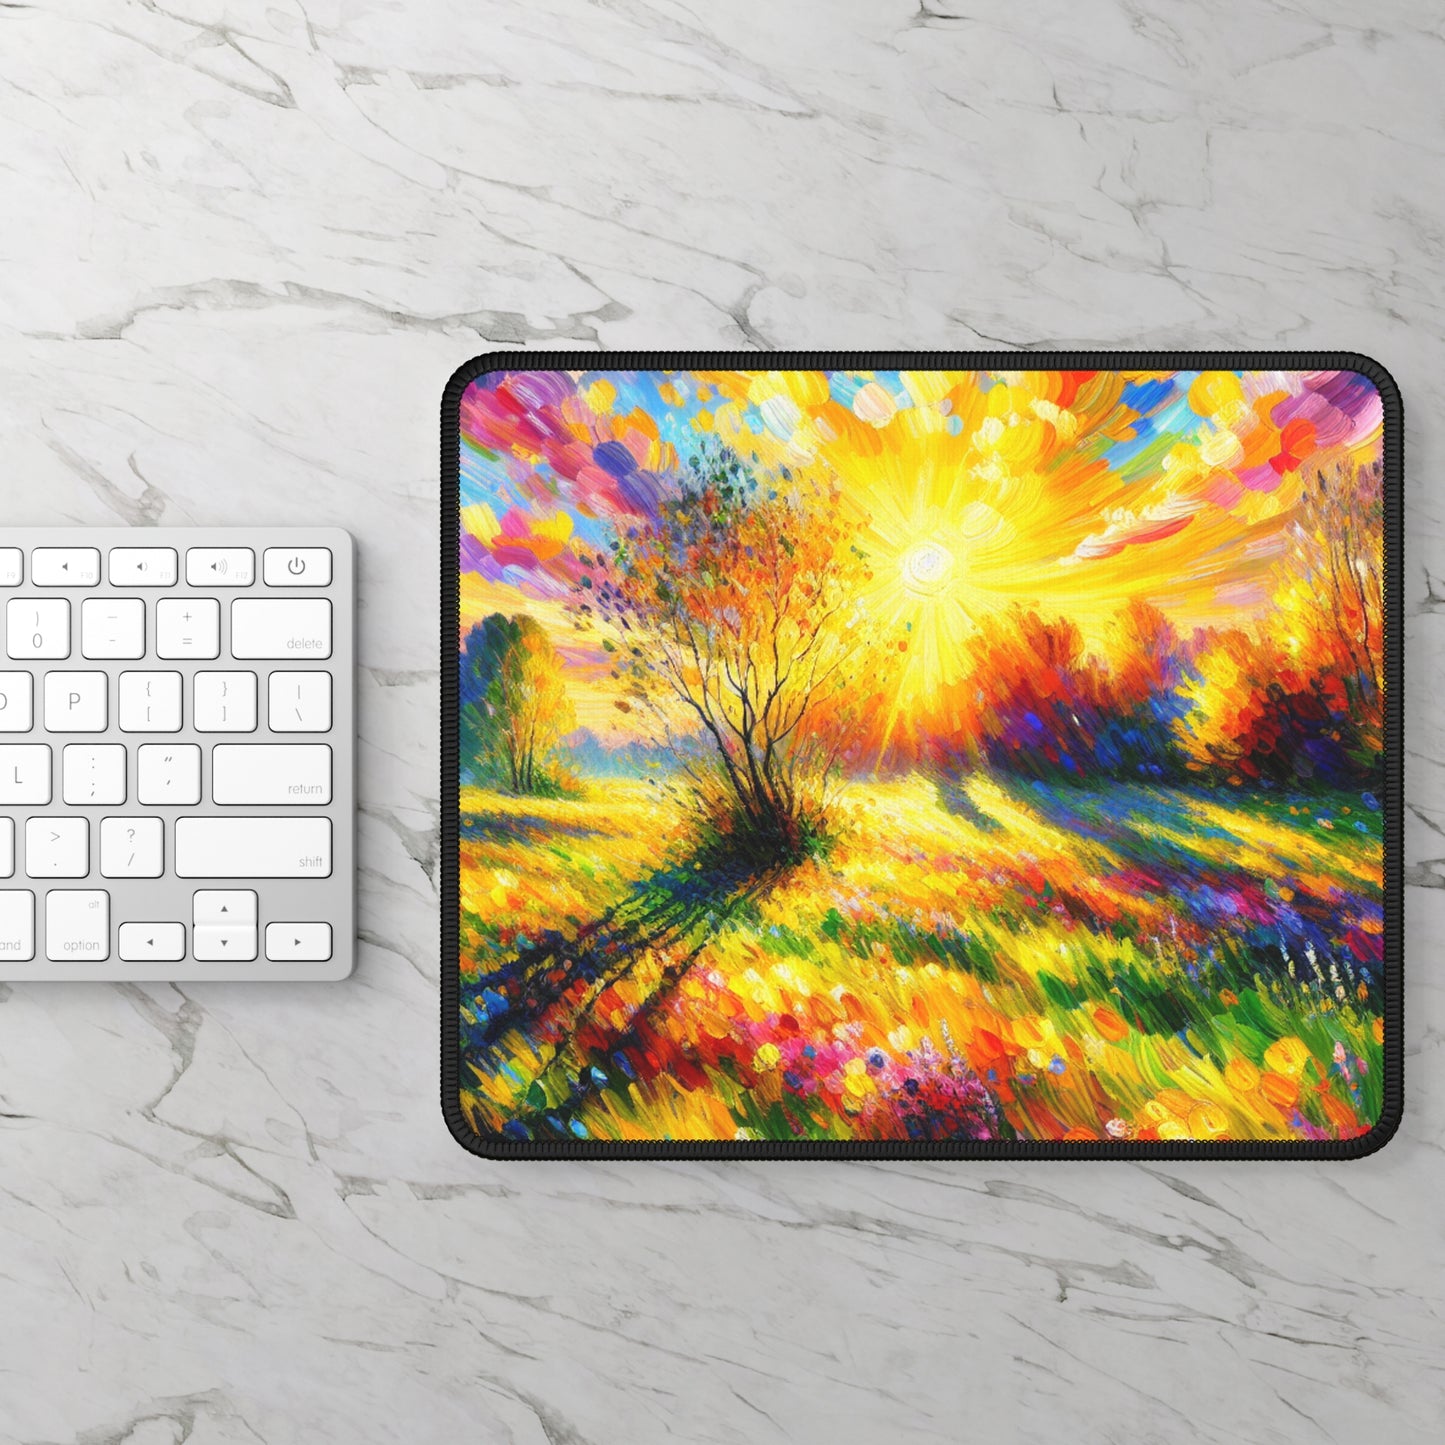 "Vibrant Springtime Sky" - The Alien Gaming Mouse Pad Fauvism Style